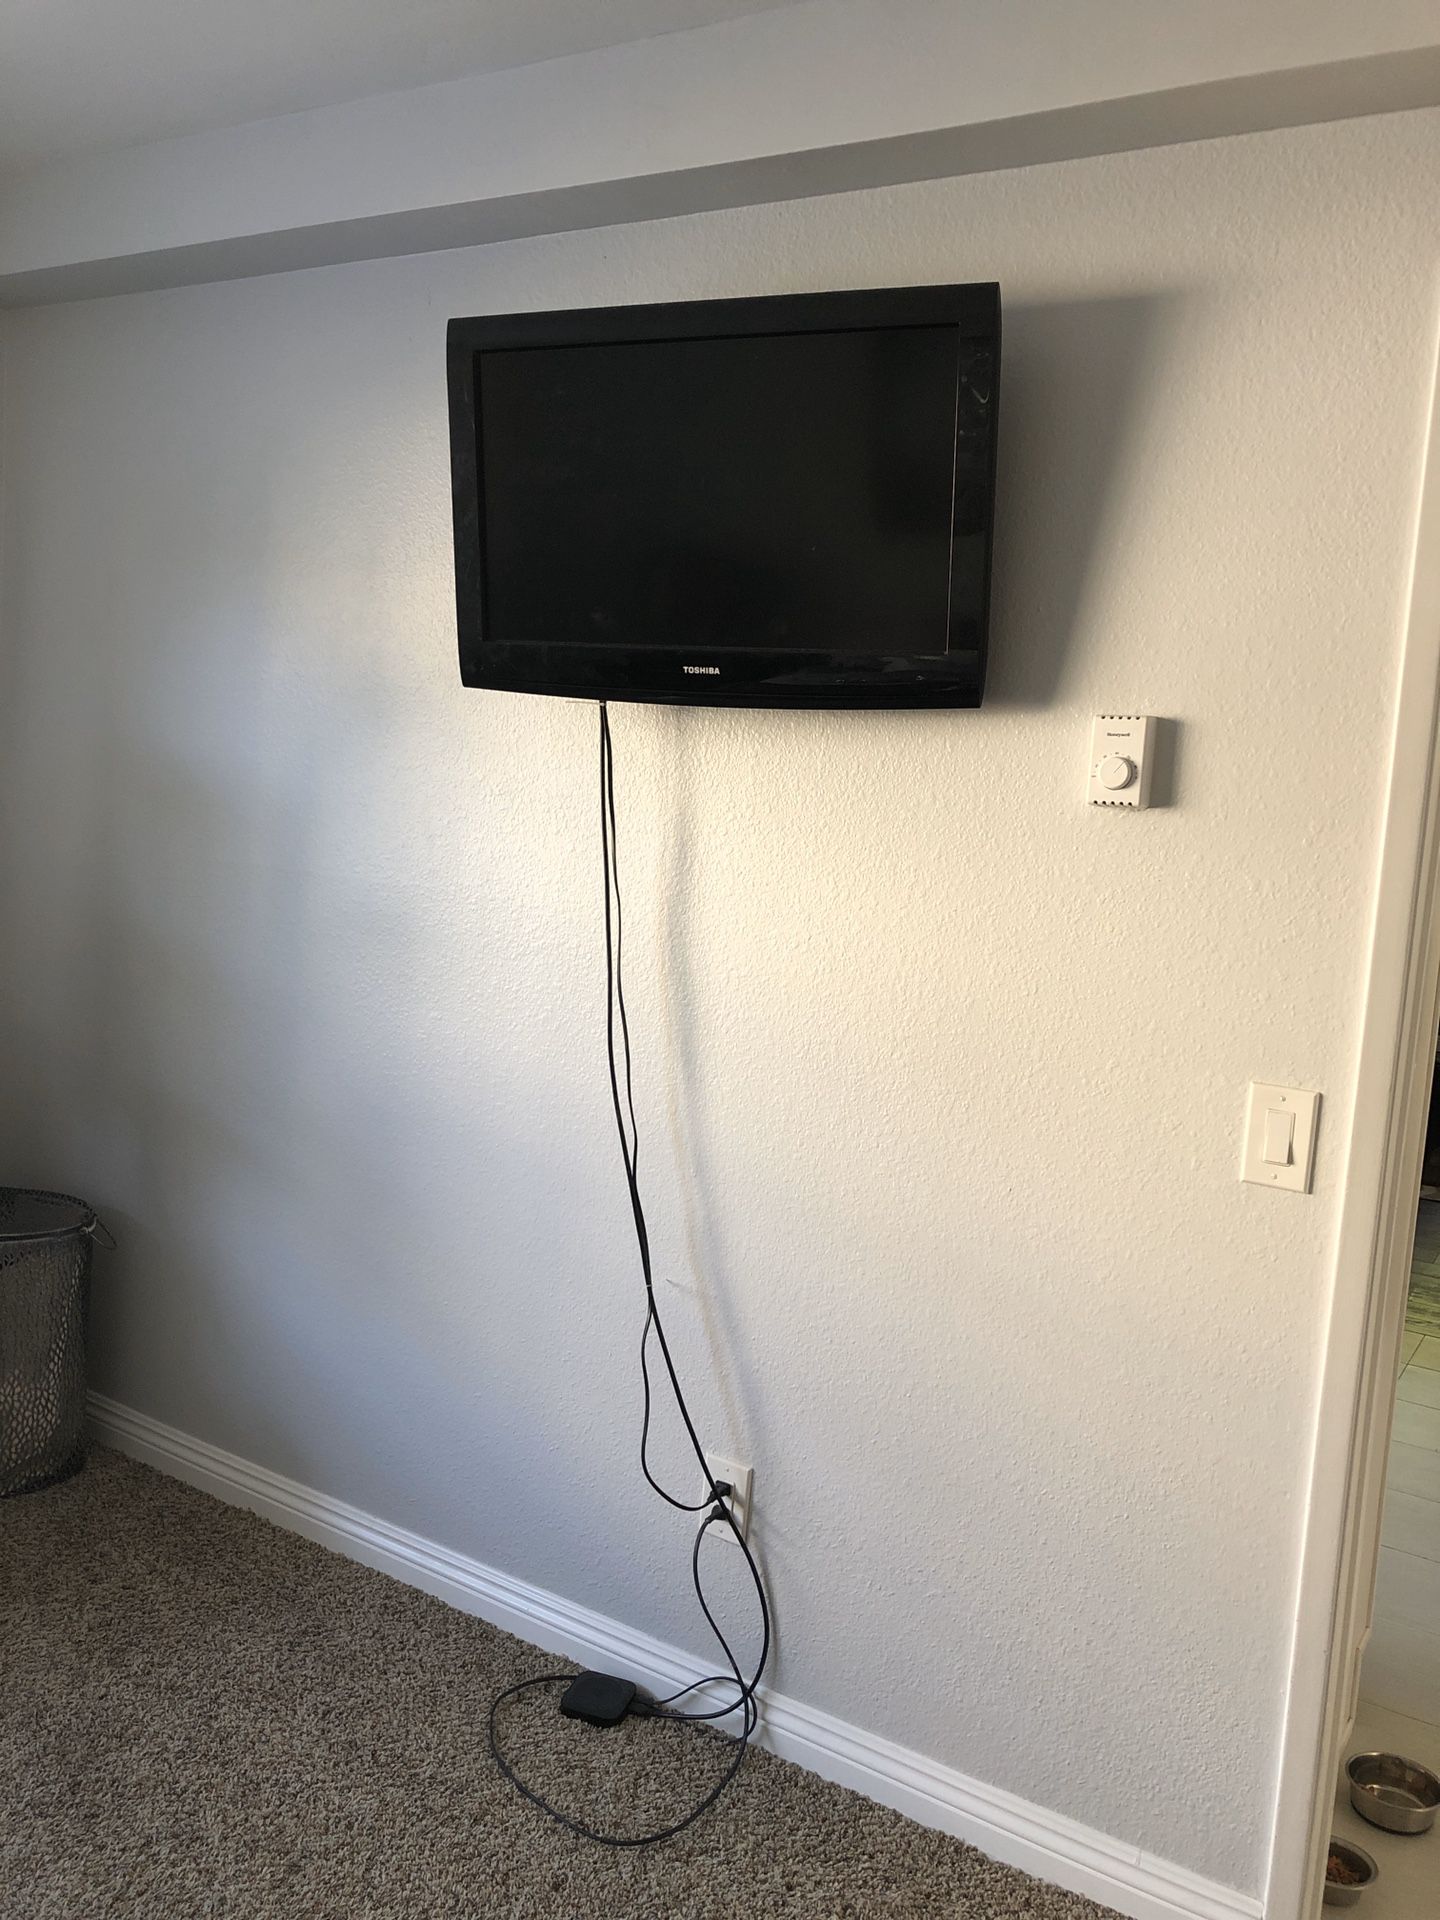 32 inch tv and wall mount